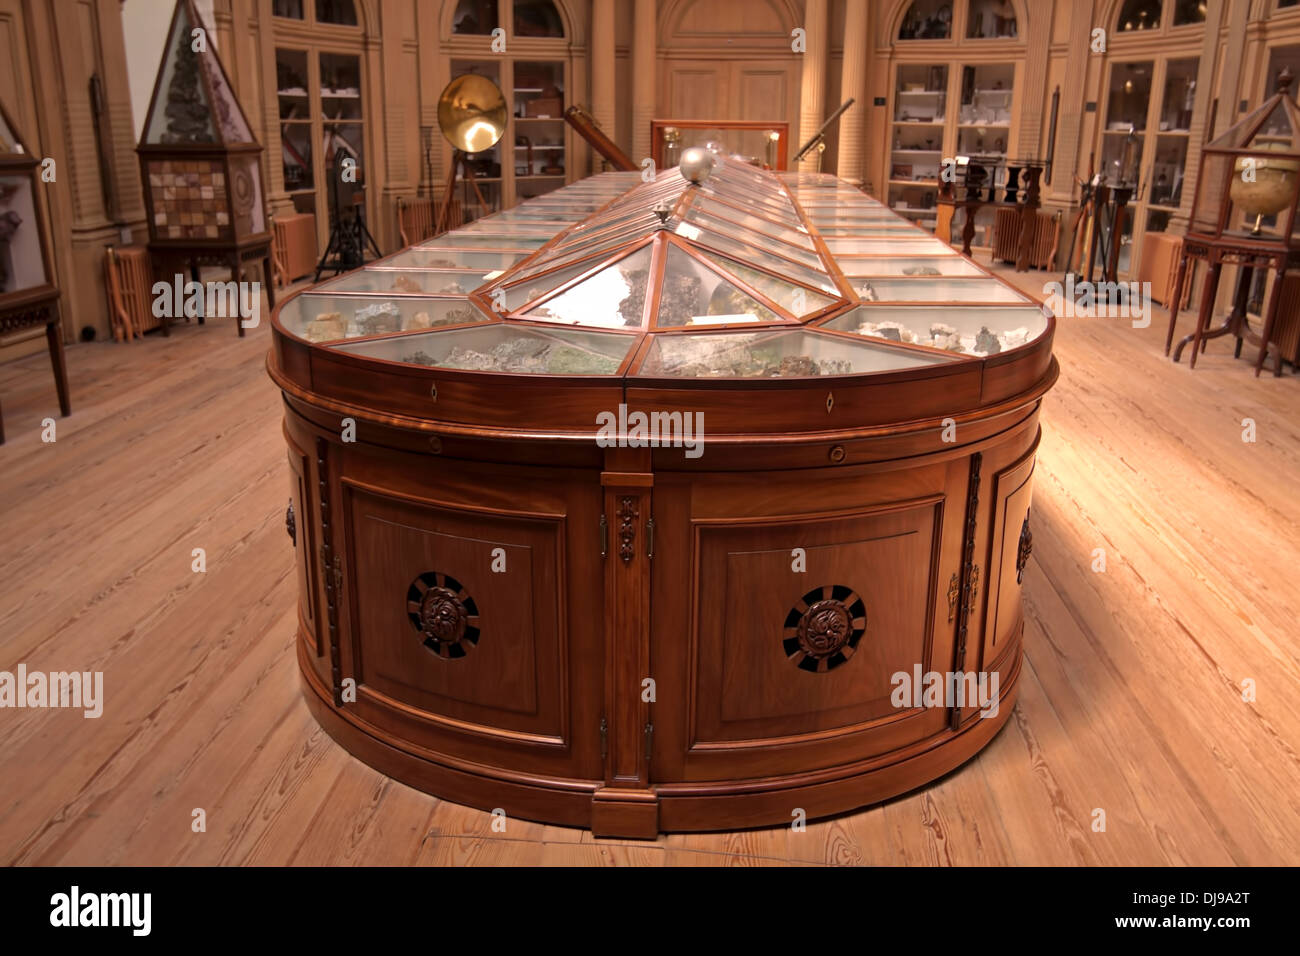 A huge wooden display case in the Oval Room at Teylers Museum, Haarlem, North Holland, The Netherlands. Stock Photo